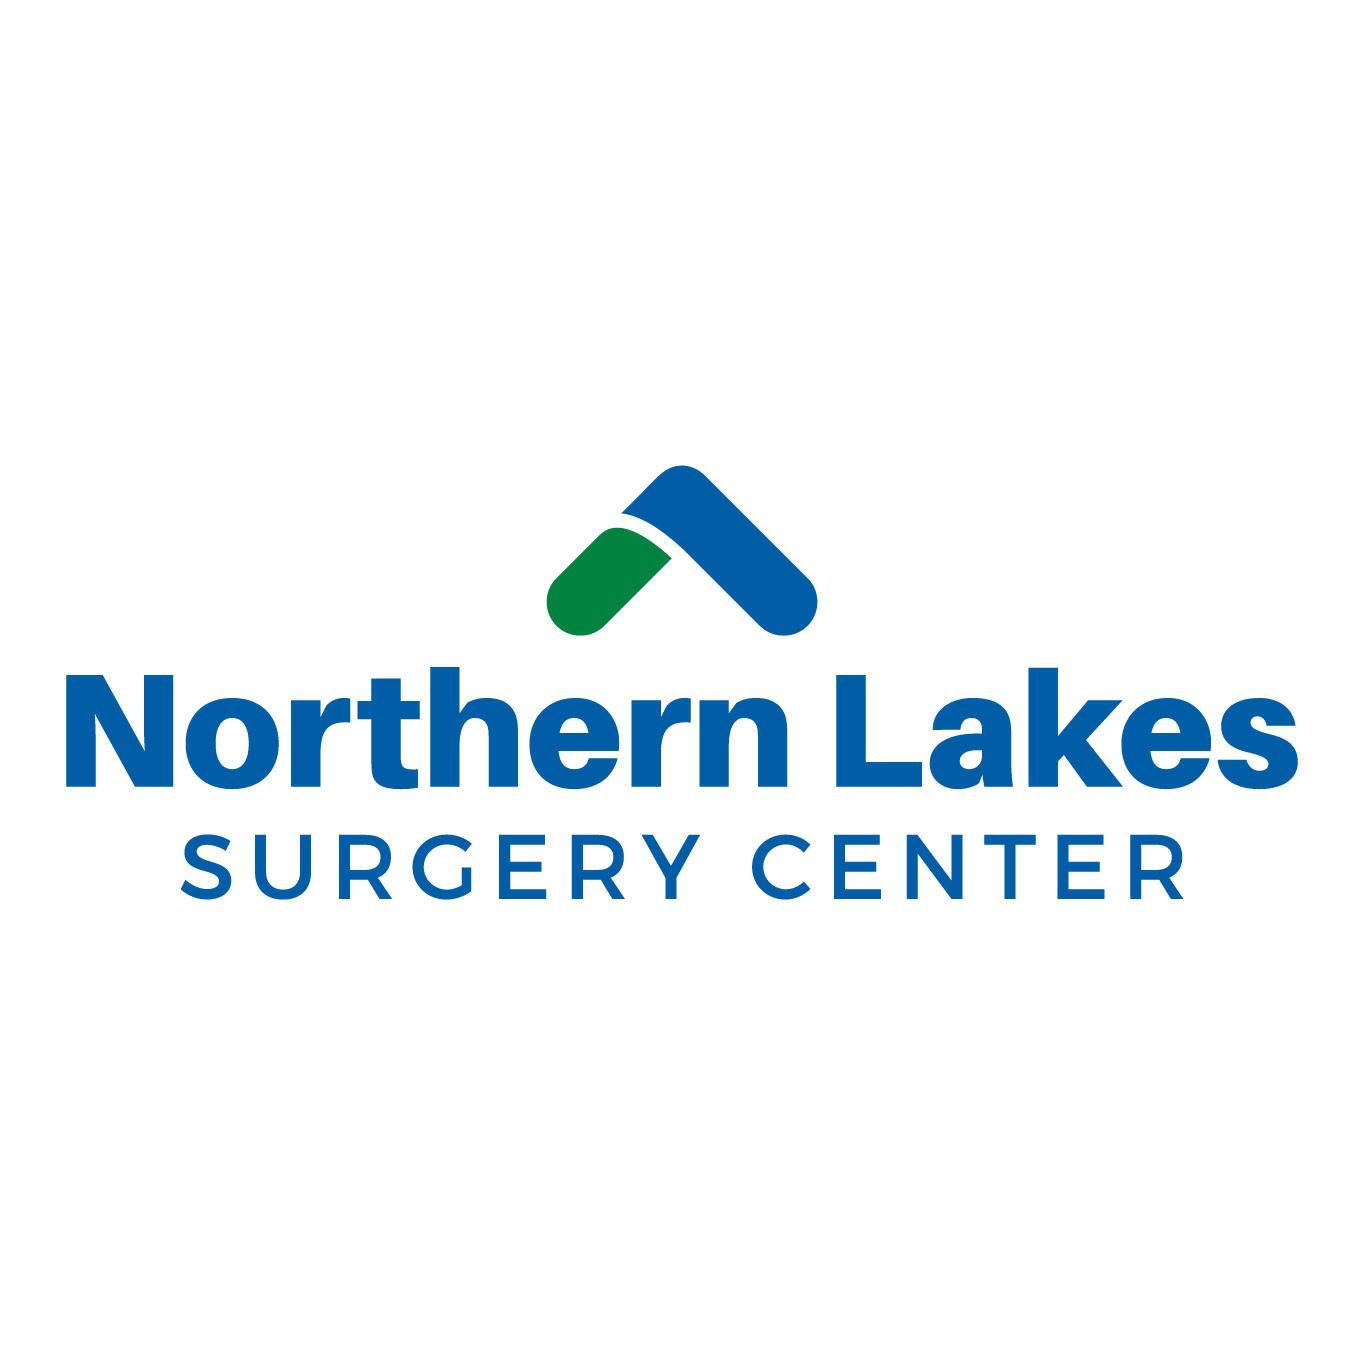 Northern Lakes Surgery Center